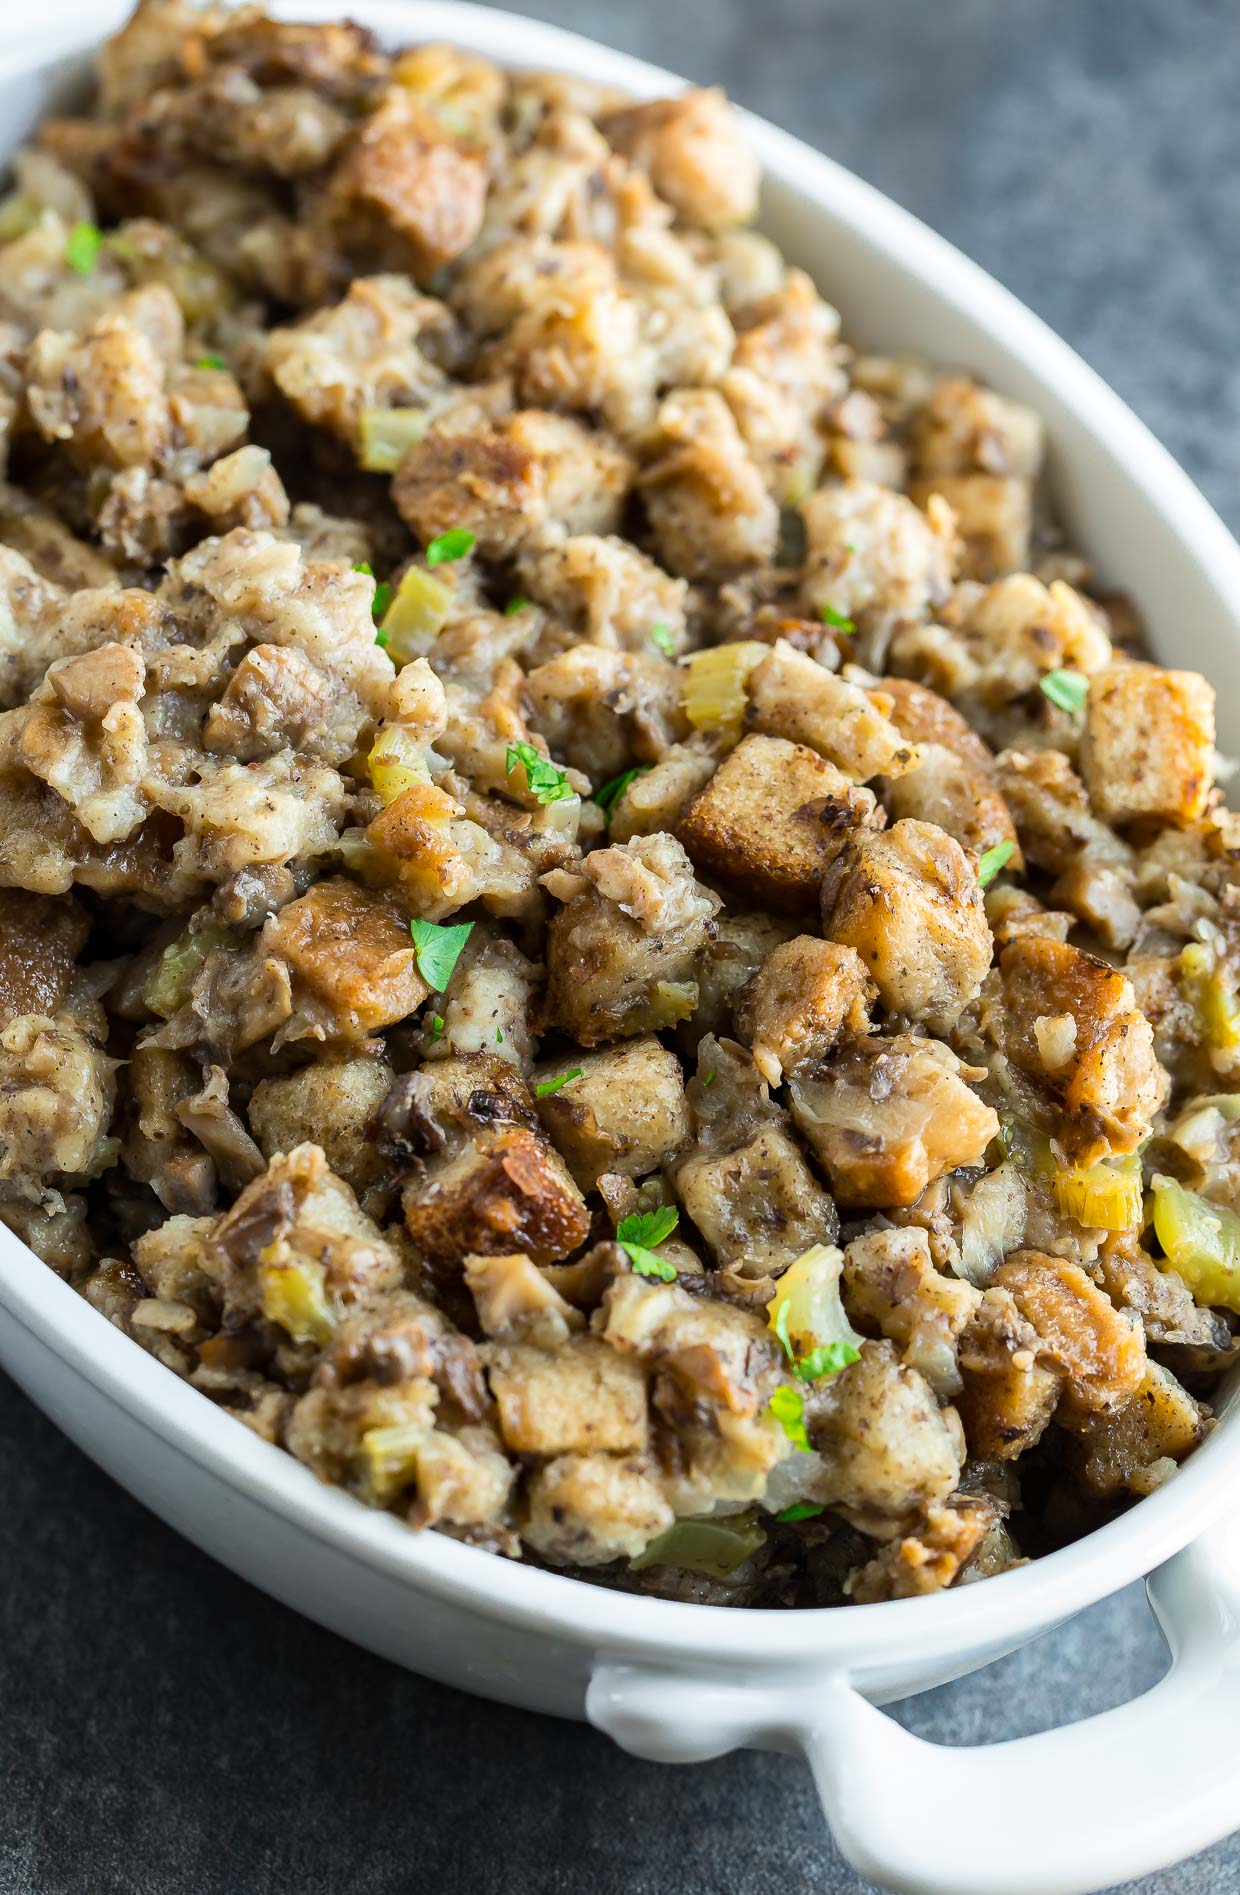 Save precious oven space with this classic Slow Cooker Stuffing recipe! Since converting my mom's Thanksgiving stuffing to the crock-pot I've been OBSESSED with the results. It comes out perfectly tender on the inside and crisp on the outside!